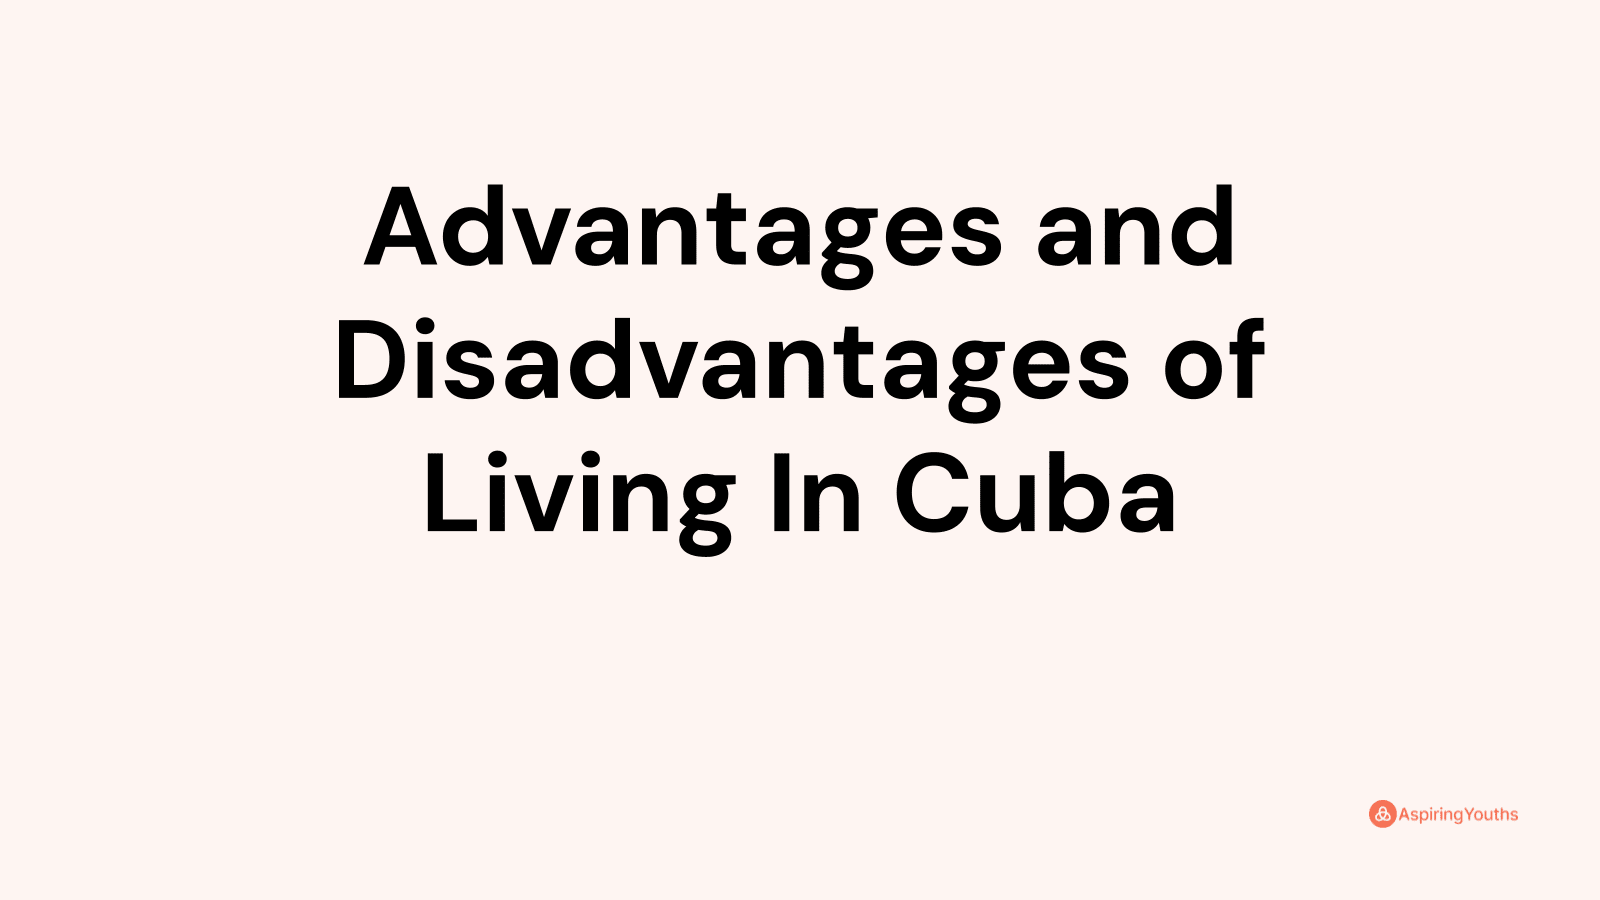 Advantages and disadvantages of Living In Cuba